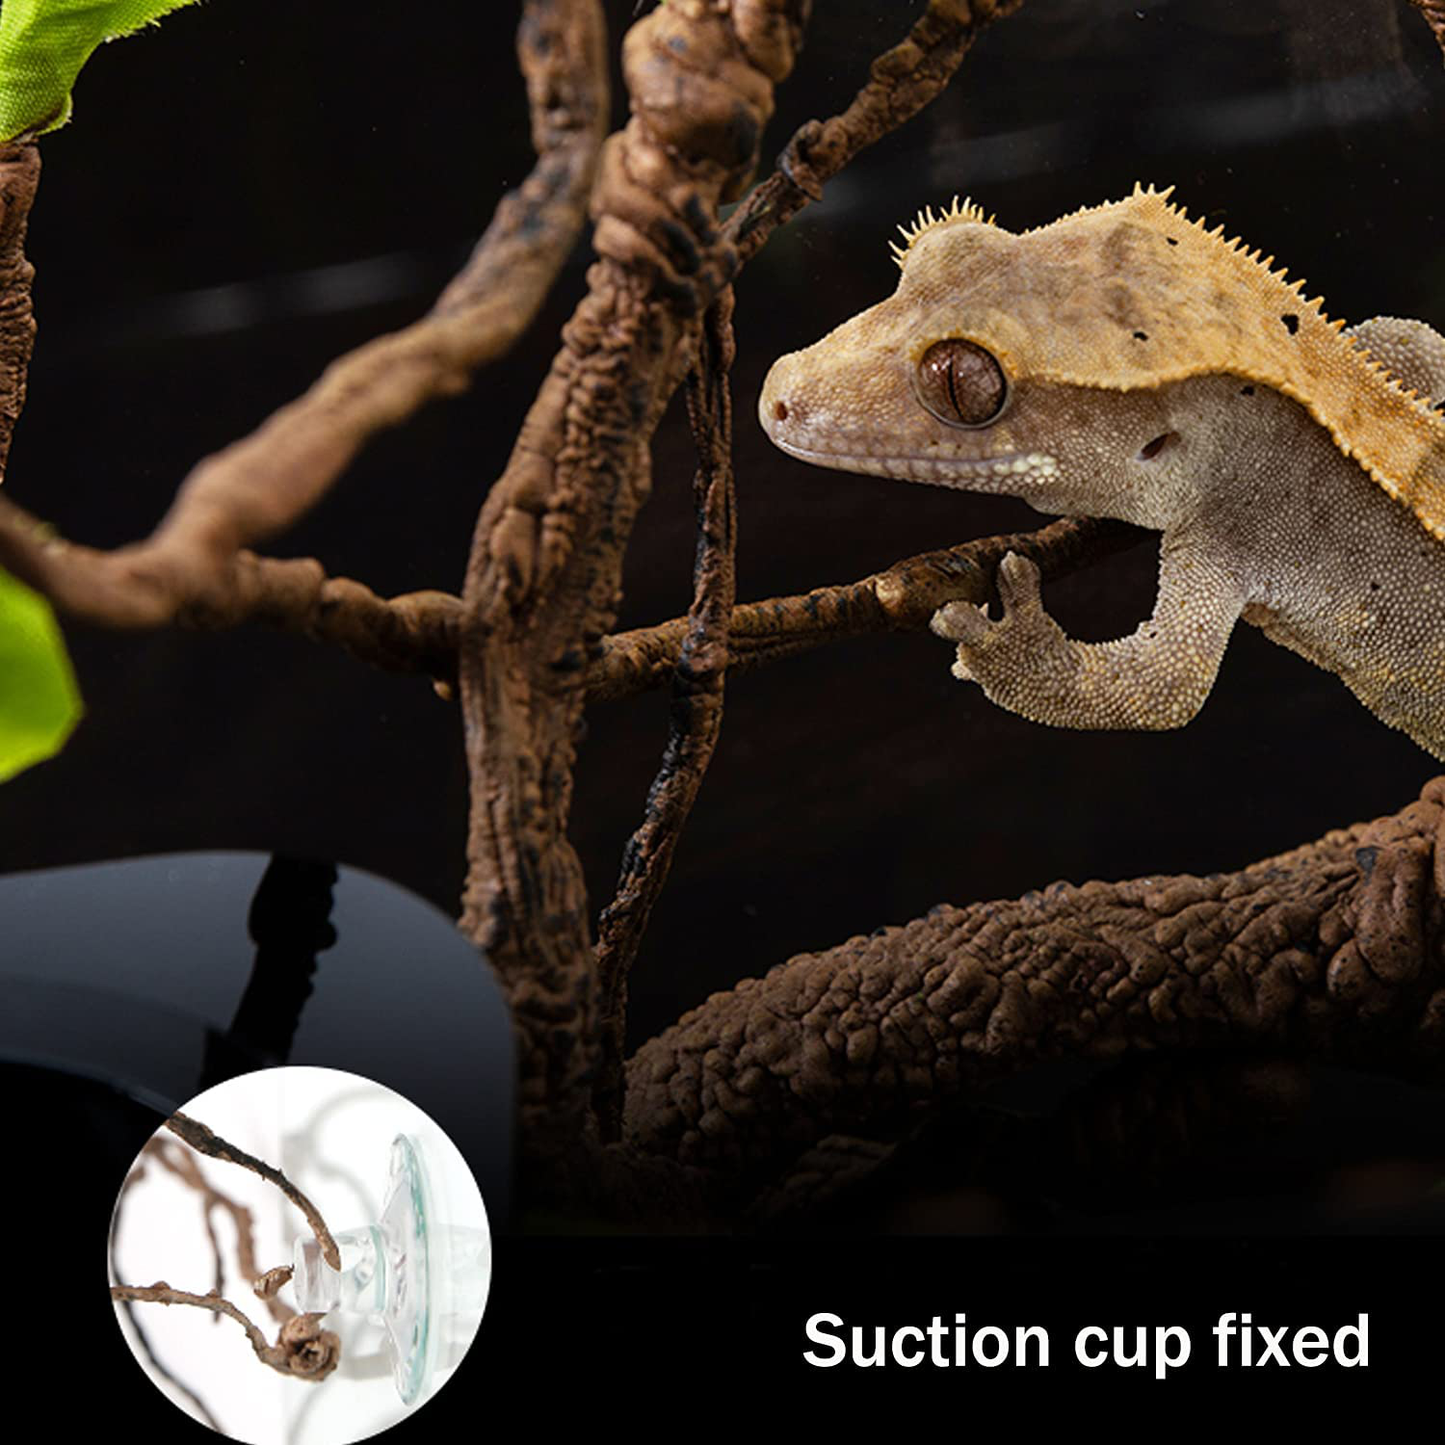 HERCOCCI Leopard Gecko Tank Accessories, Coconut Shell Ladder Hideout Hole Reptile Climbing Vine Habitat Decor with 3 Pieces Colorful Plastic Plants for Chameleon Lizard Snake Hermit Crab